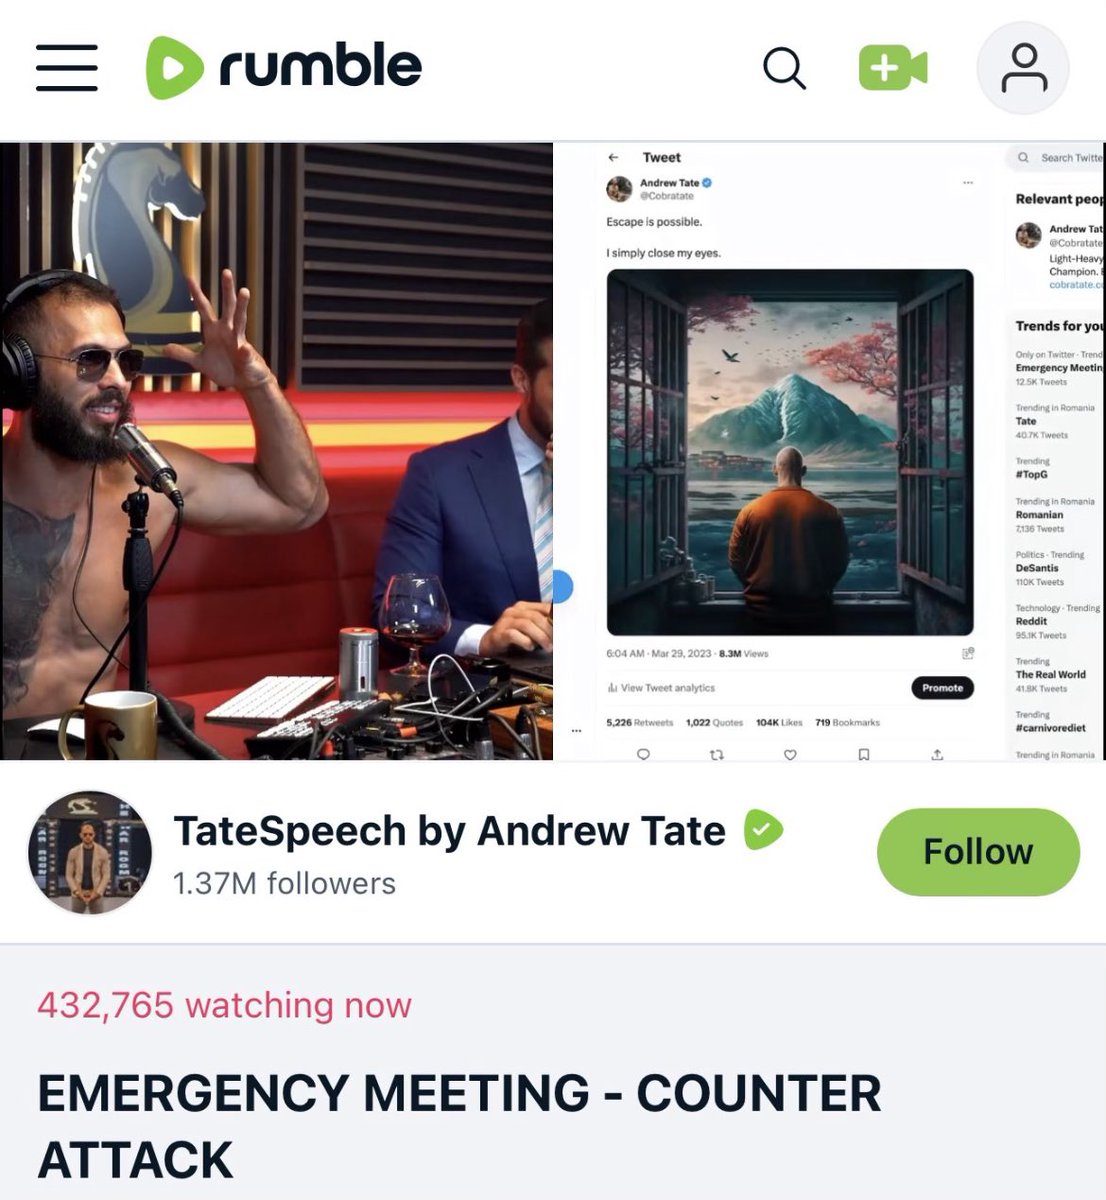 Andrew Tate’s return stream peaked over 432k concurrent live viewers on rumble! 

This is the top 5 biggest streams EVER on the internet! #DramaAlert